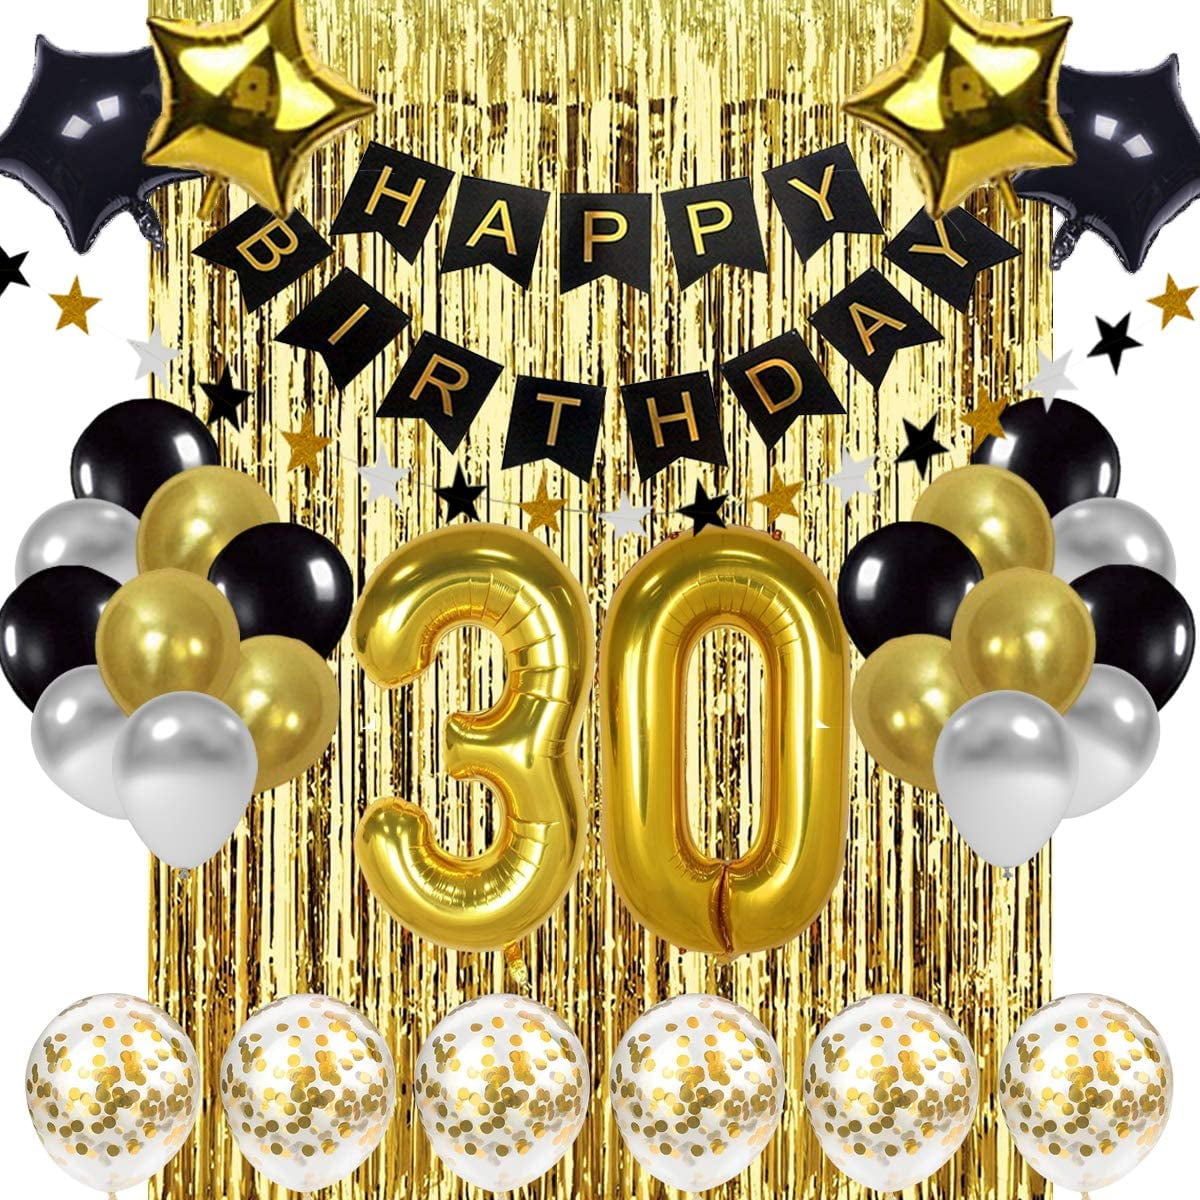 30th Birthday Decorations for Men Women Boy Girl,Blue Black Birthday Party Supplies with 30 Silver Number Balloon Happy Birthday Banner for 30th and 3rd Birthday Party